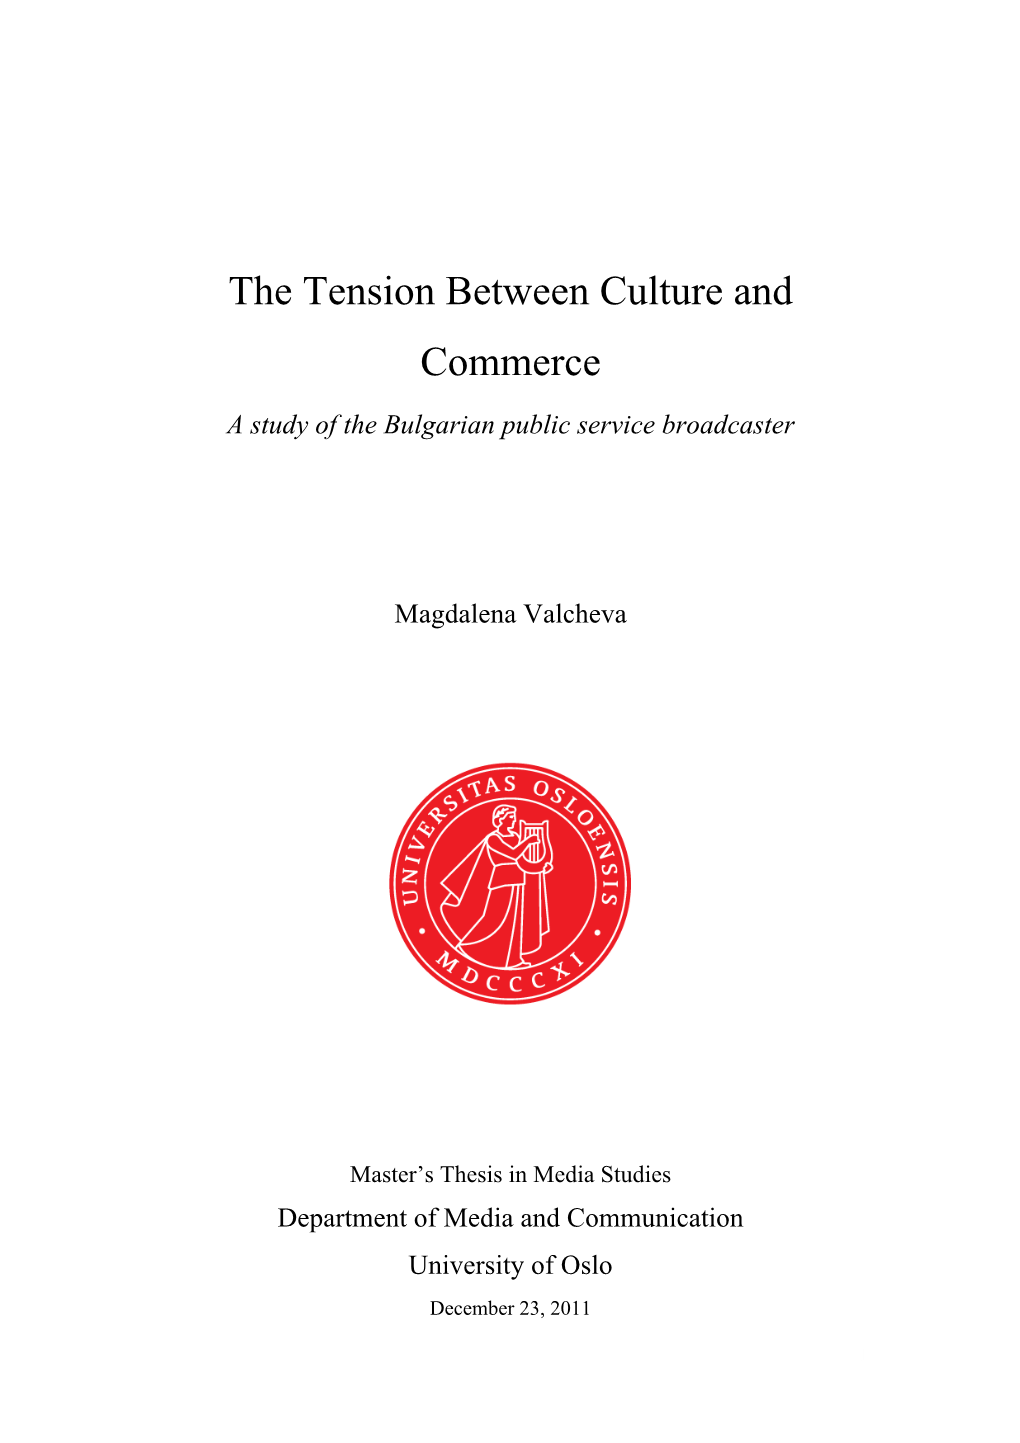 Magdalenavalche ... N Culture and Commerce.Pdf